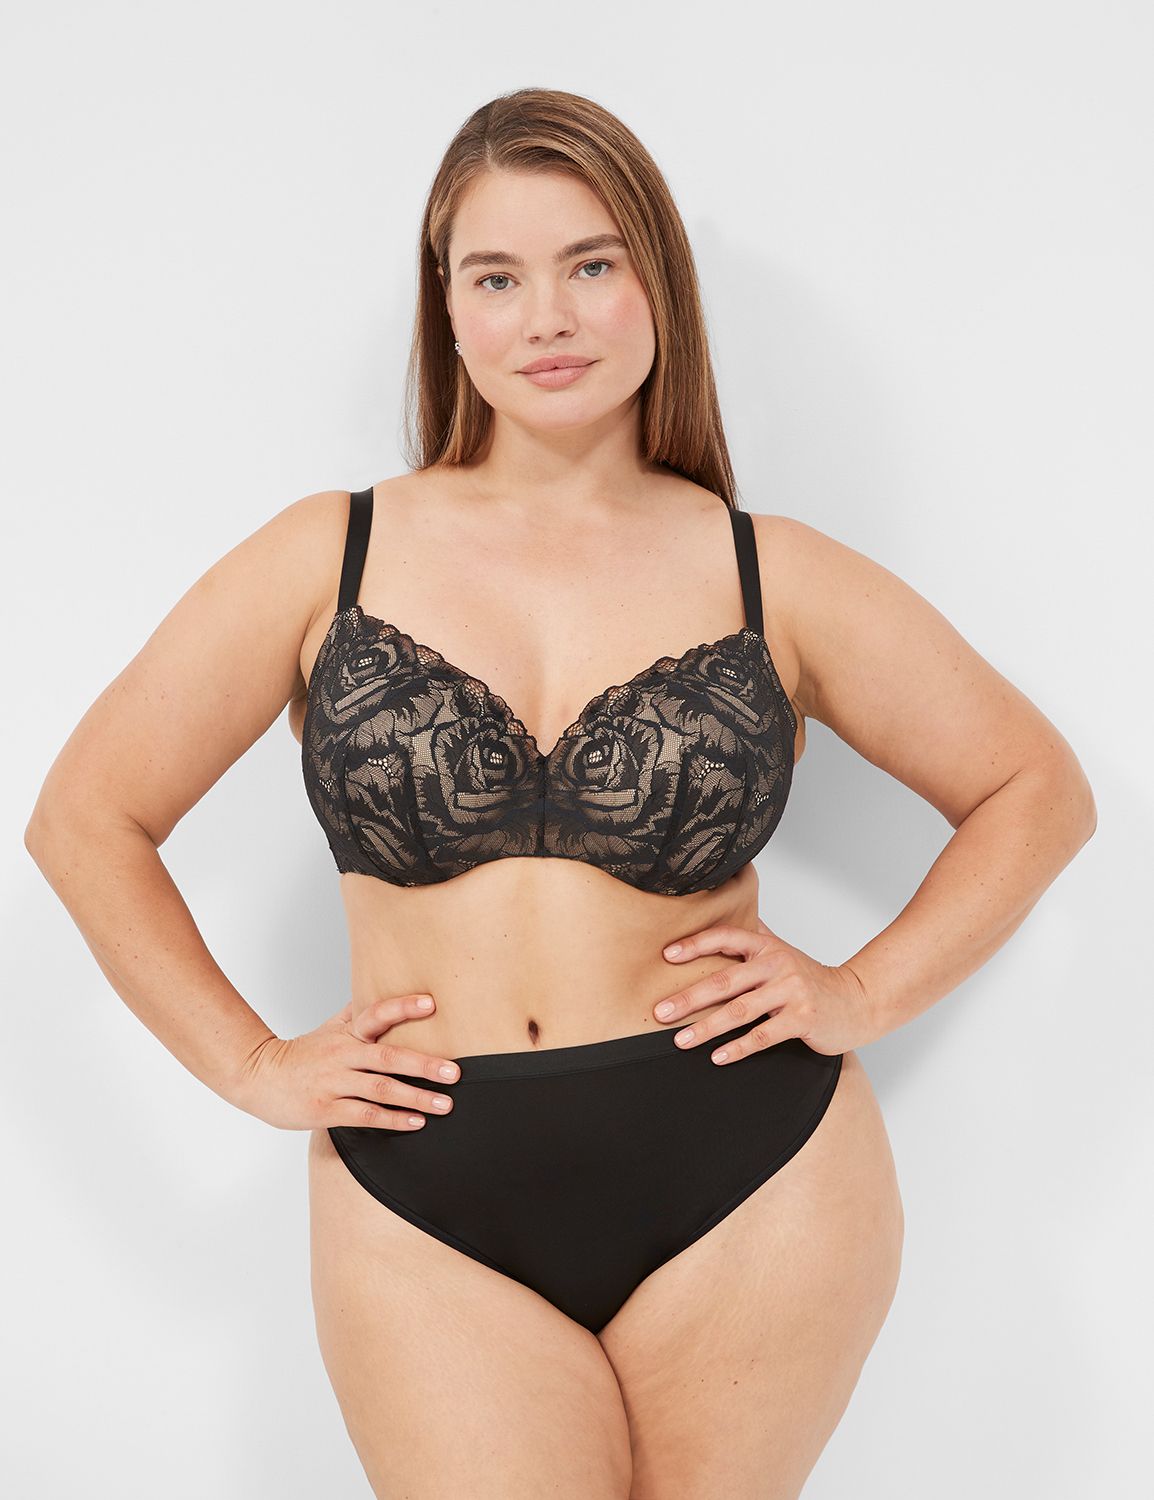 Cacique 38F Bra Black Smooth Balconette Plus Size Lane Bryant Intimates 13  - $23 - From Bailey